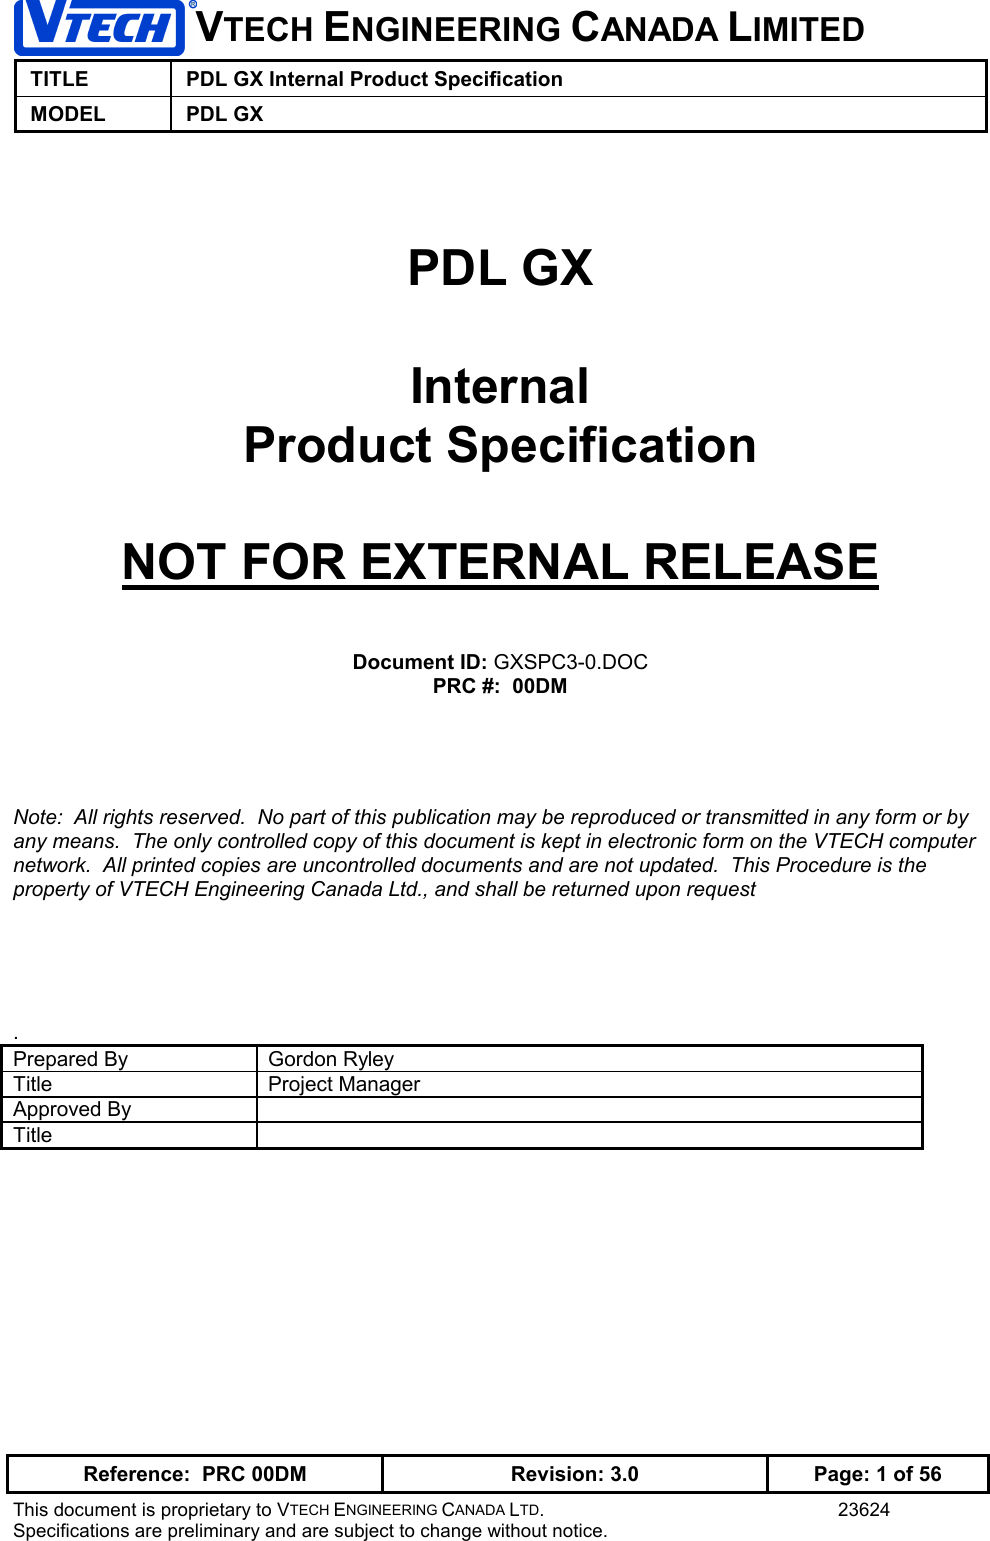 VTECH ENGINEERING CANADA LIMITEDTITLE PDL GX Internal Product SpecificationMODEL PDL GXReference:  PRC 00DM Revision: 3.0 Page: 1 of 56This document is proprietary to VTECH ENGINEERING CANADA LTD. 23624Specifications are preliminary and are subject to change without notice.PDL GXInternalProduct SpecificationNOT FOR EXTERNAL RELEASEDocument ID: GXSPC3-0.DOCPRC #:  00DMNote:  All rights reserved.  No part of this publication may be reproduced or transmitted in any form or byany means.  The only controlled copy of this document is kept in electronic form on the VTECH computernetwork.  All printed copies are uncontrolled documents and are not updated.  This Procedure is theproperty of VTECH Engineering Canada Ltd., and shall be returned upon request.Prepared By Gordon RyleyTitle Project ManagerApproved ByTitle